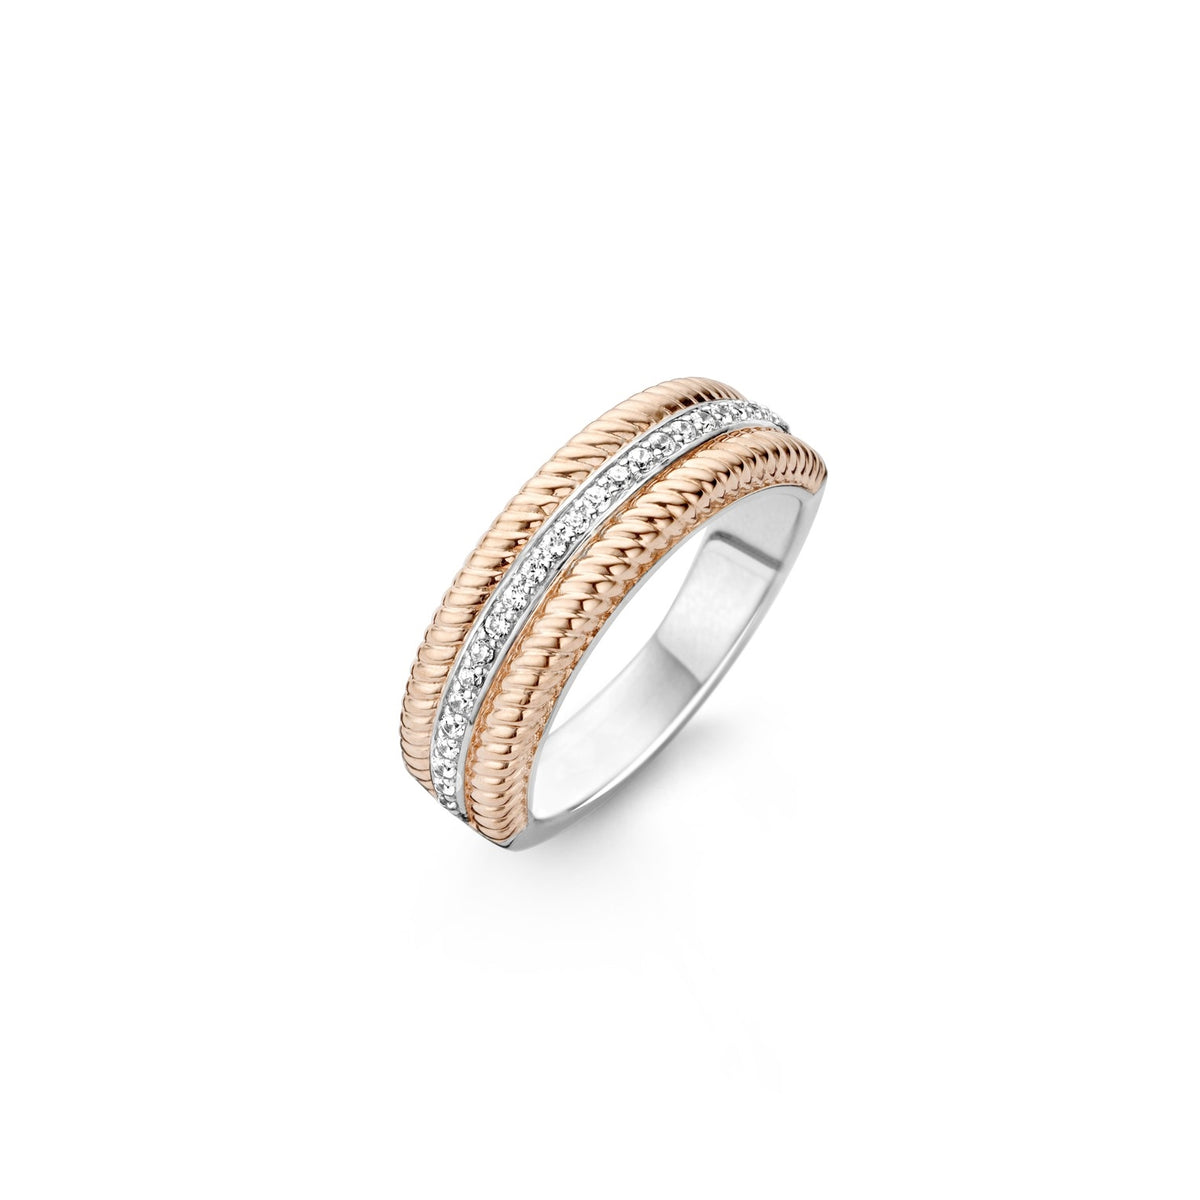 TI SENTO Sterling Silver Ring with Cubic Zirconia and Rose Tone Edges